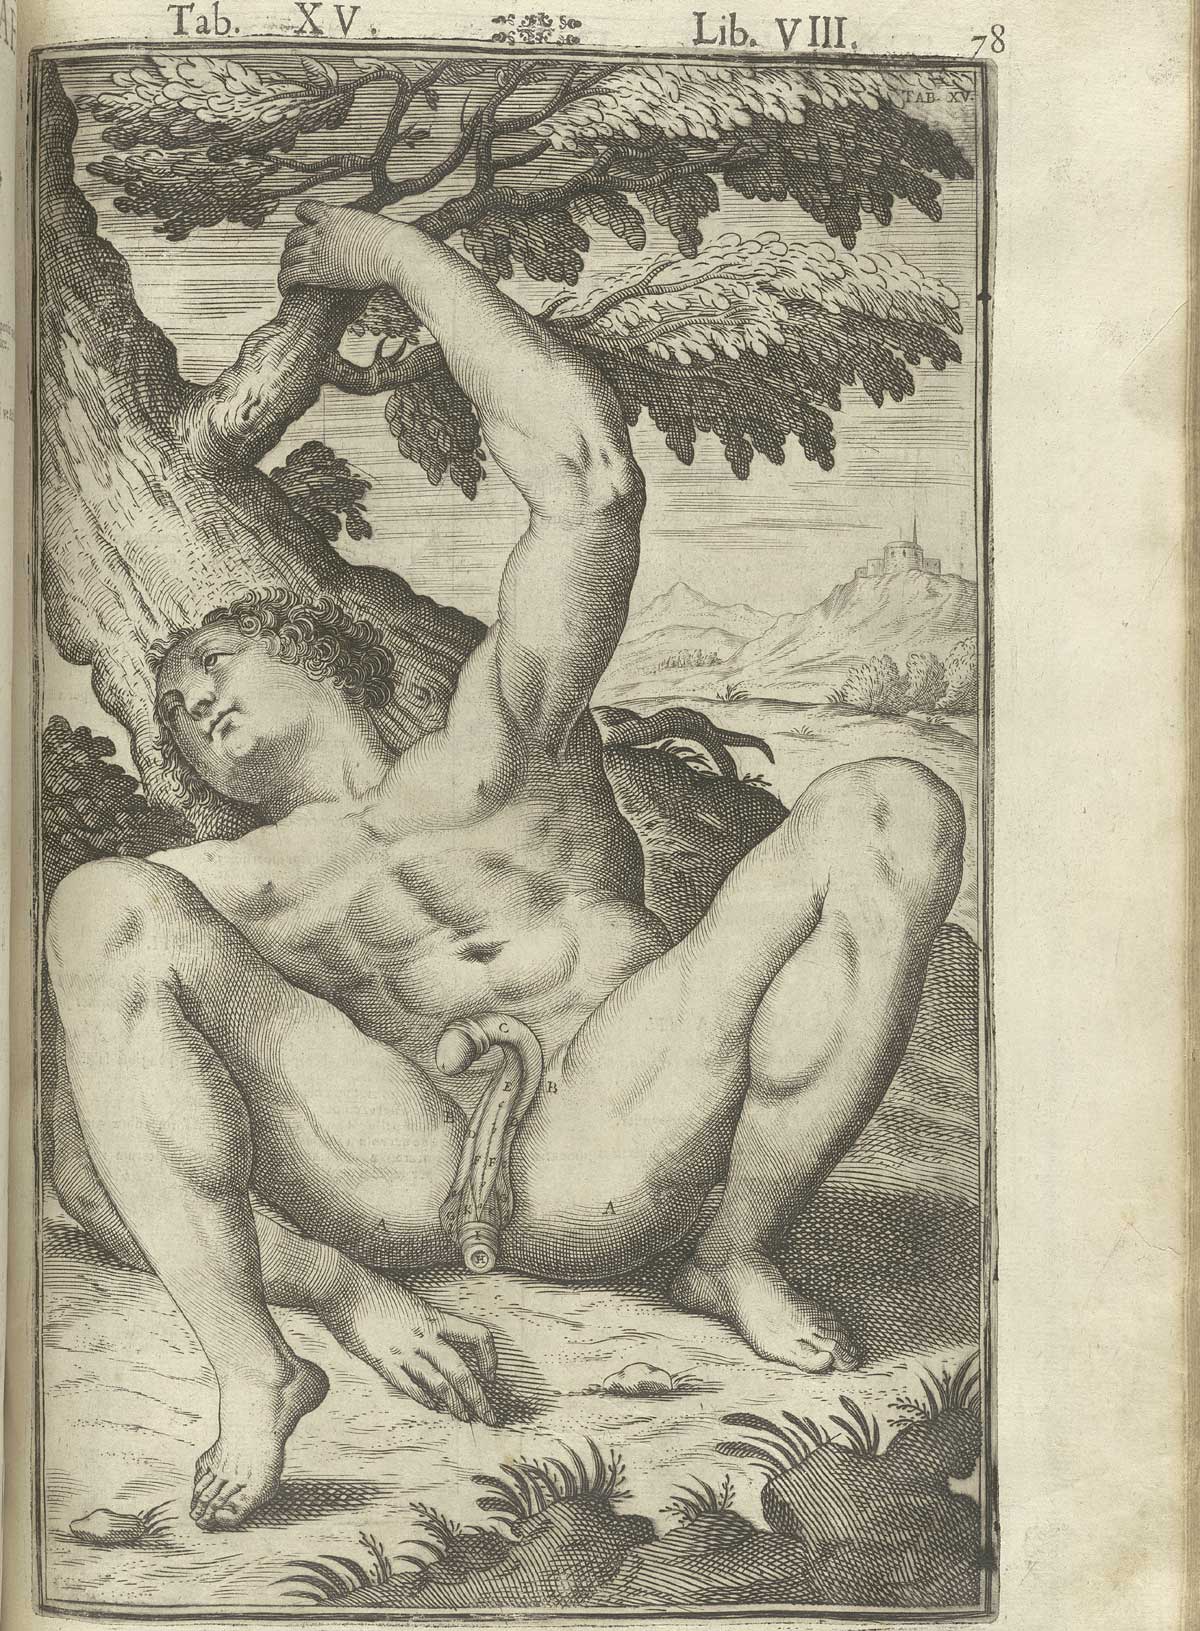 Engraving of recumbent nude male figure leaning against a tree in pastoral setting exposing his penis, anus, and buttocks, with some interior views of these structures, with his left arm raised touching a branch of the tree behind him; from Adriaan van de Spiegel and Giulio Cassieri’s De humani corporis fabrica libri decem, Venice, 1627, NLM call no. WZ 250 S755dh 1627.